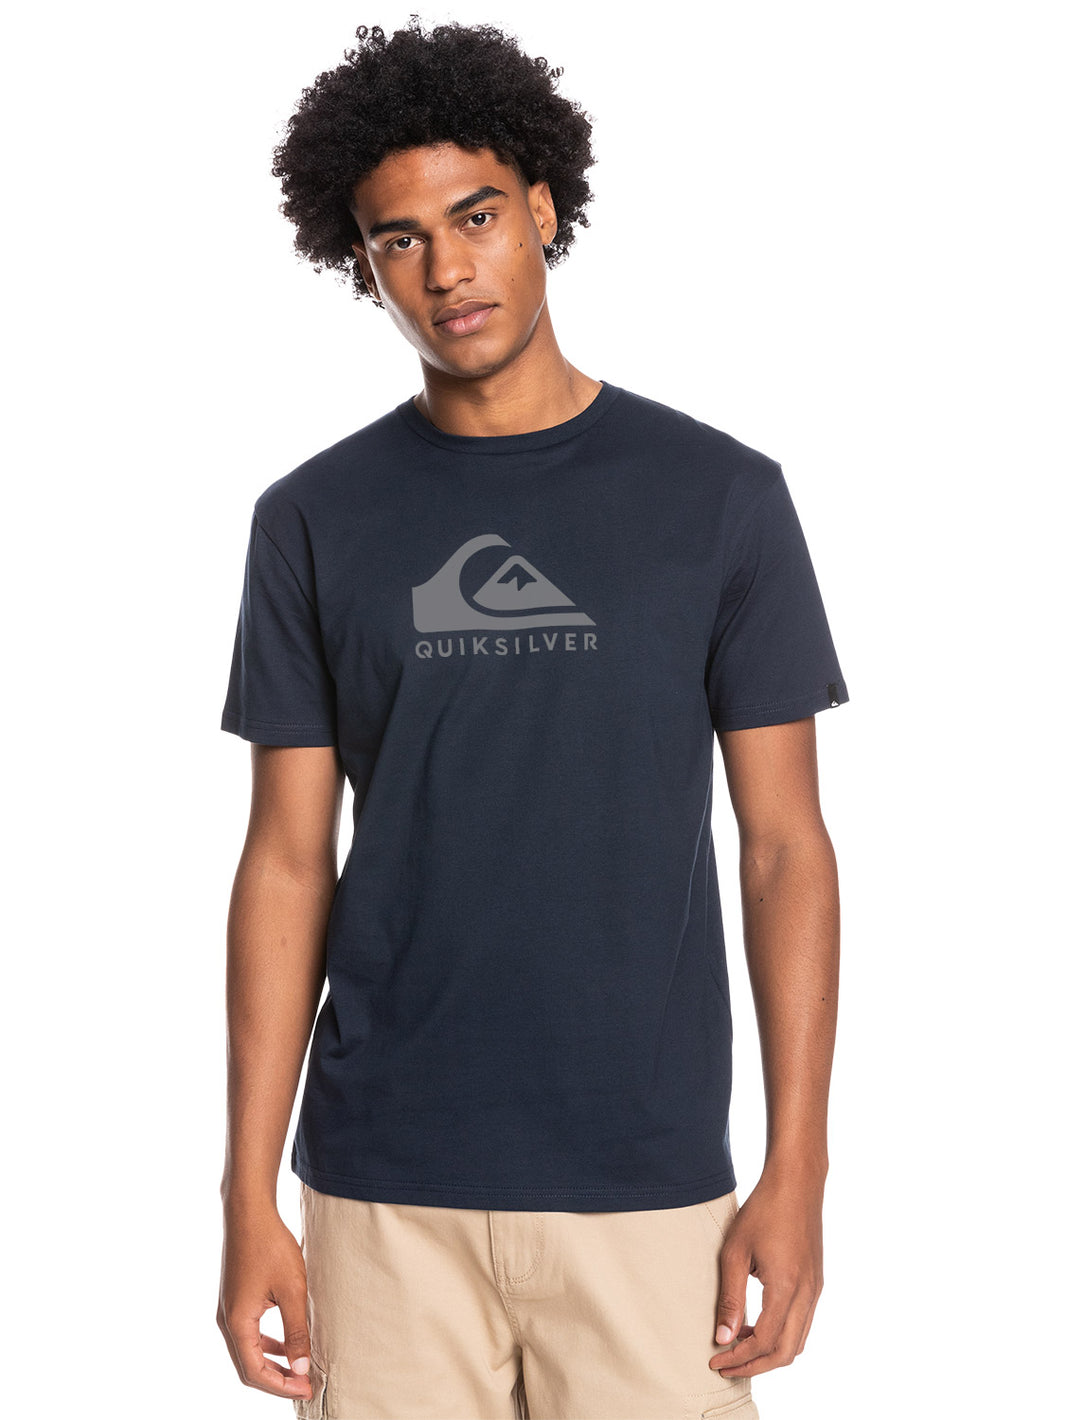 Men Lifestyle Clothing | Exclusive Deals Page 15 | Boardriders